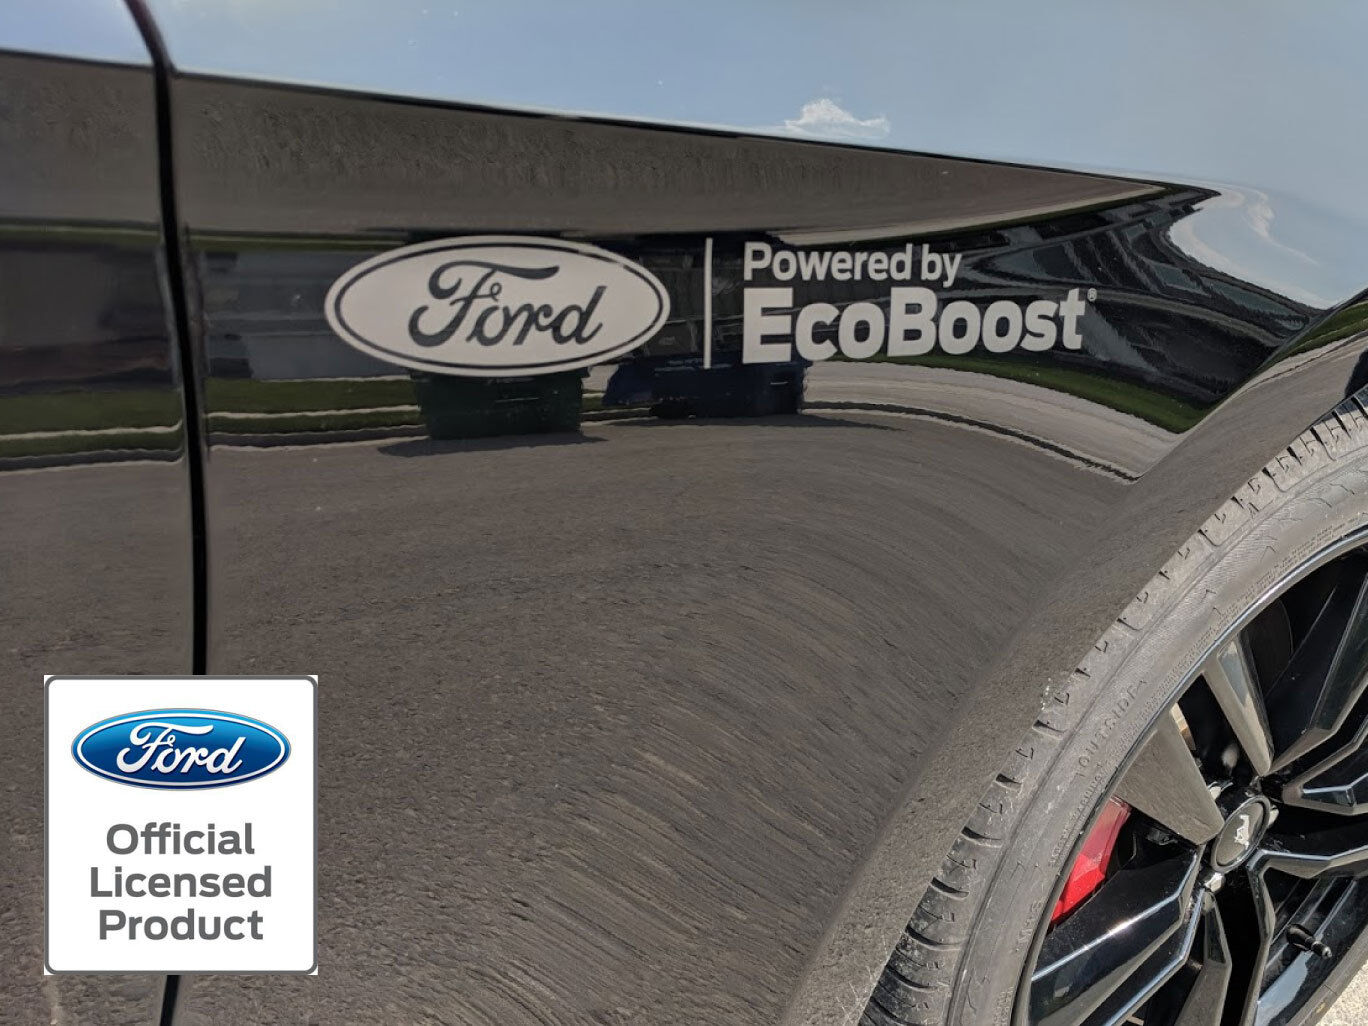 2019 Ford Mustang Powered By Ecoboost Fender Decal Vinyl Sticker Graphic Pr